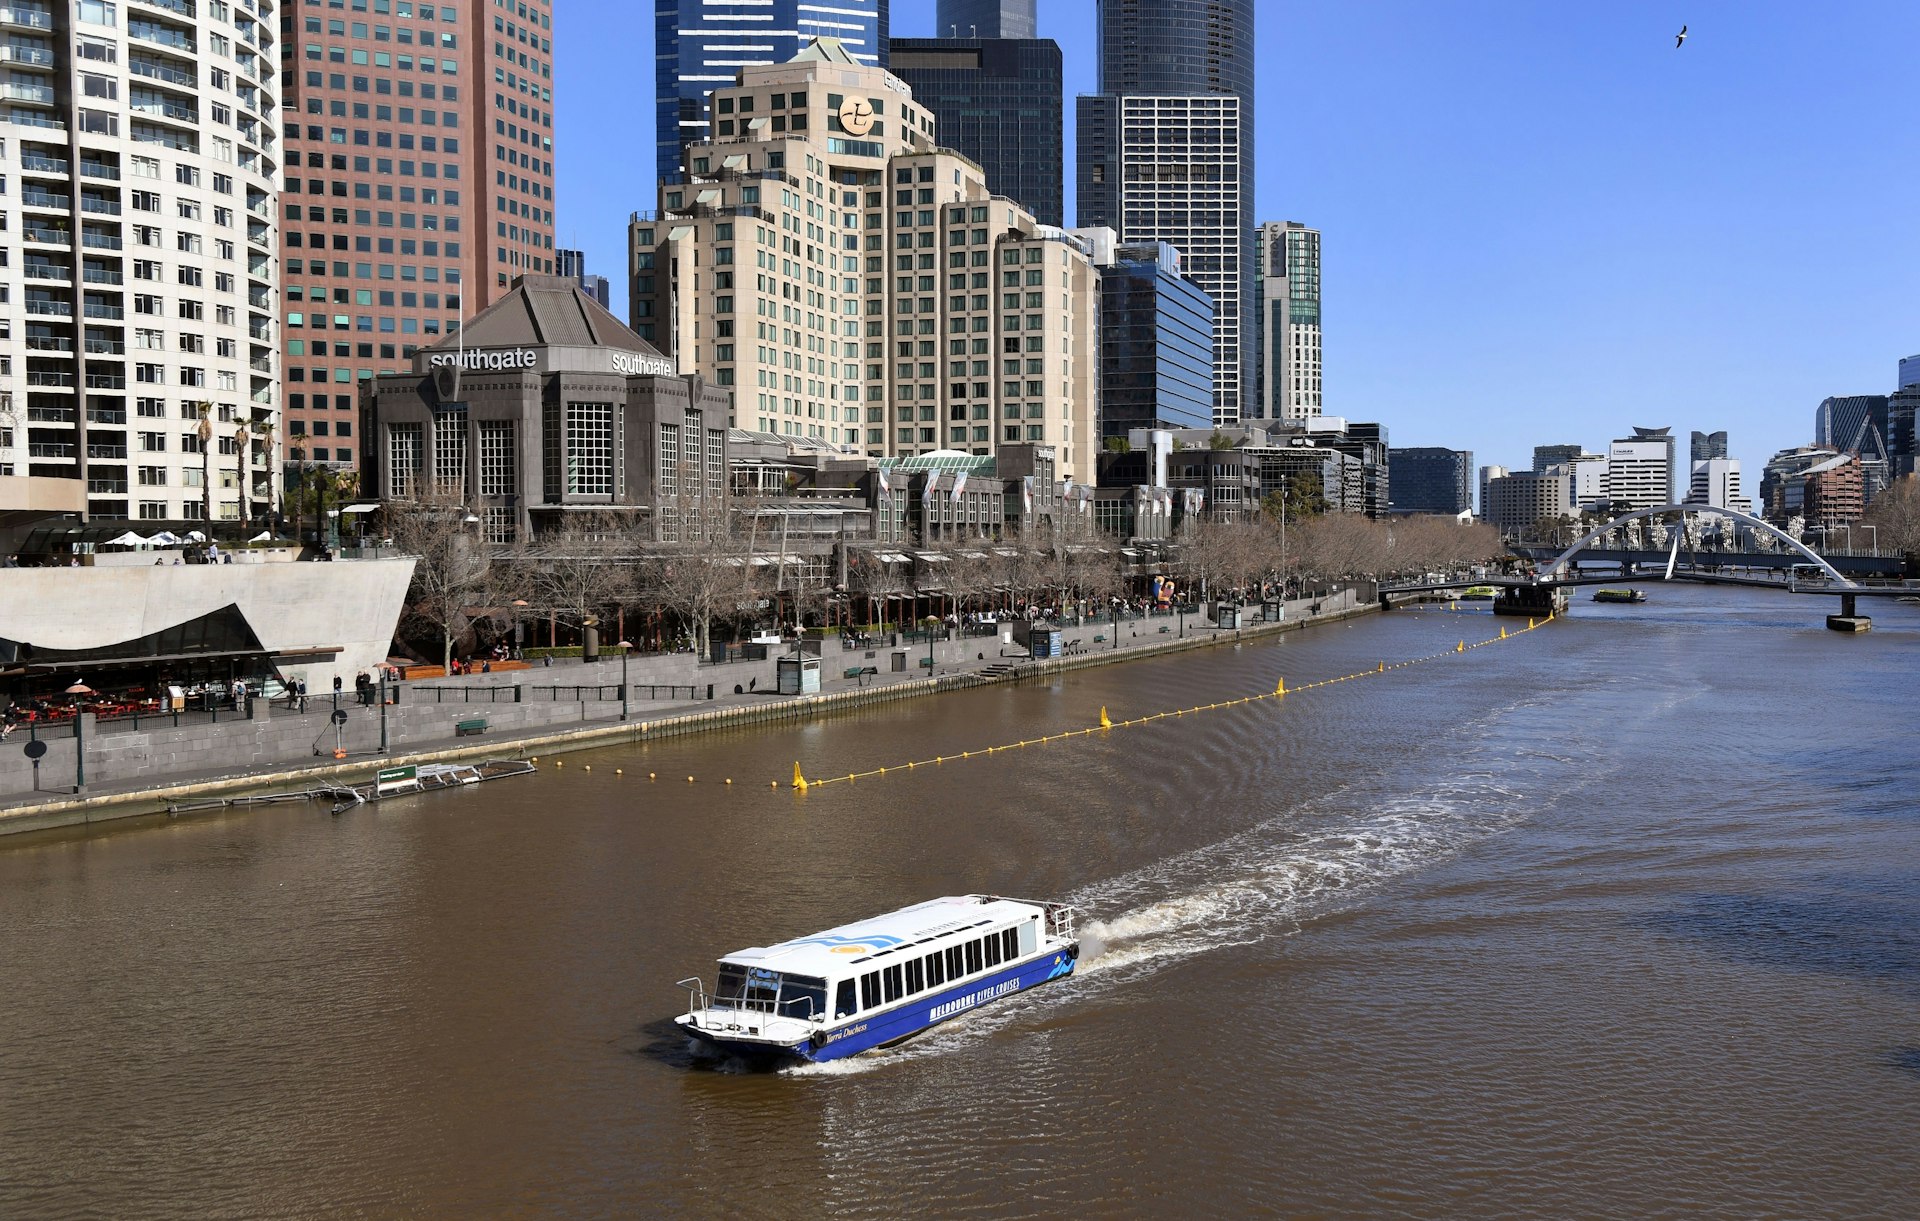 A ferry transports tourist down Melbourne's wide Yarra River. In the background, several high-rise buildings are visible.